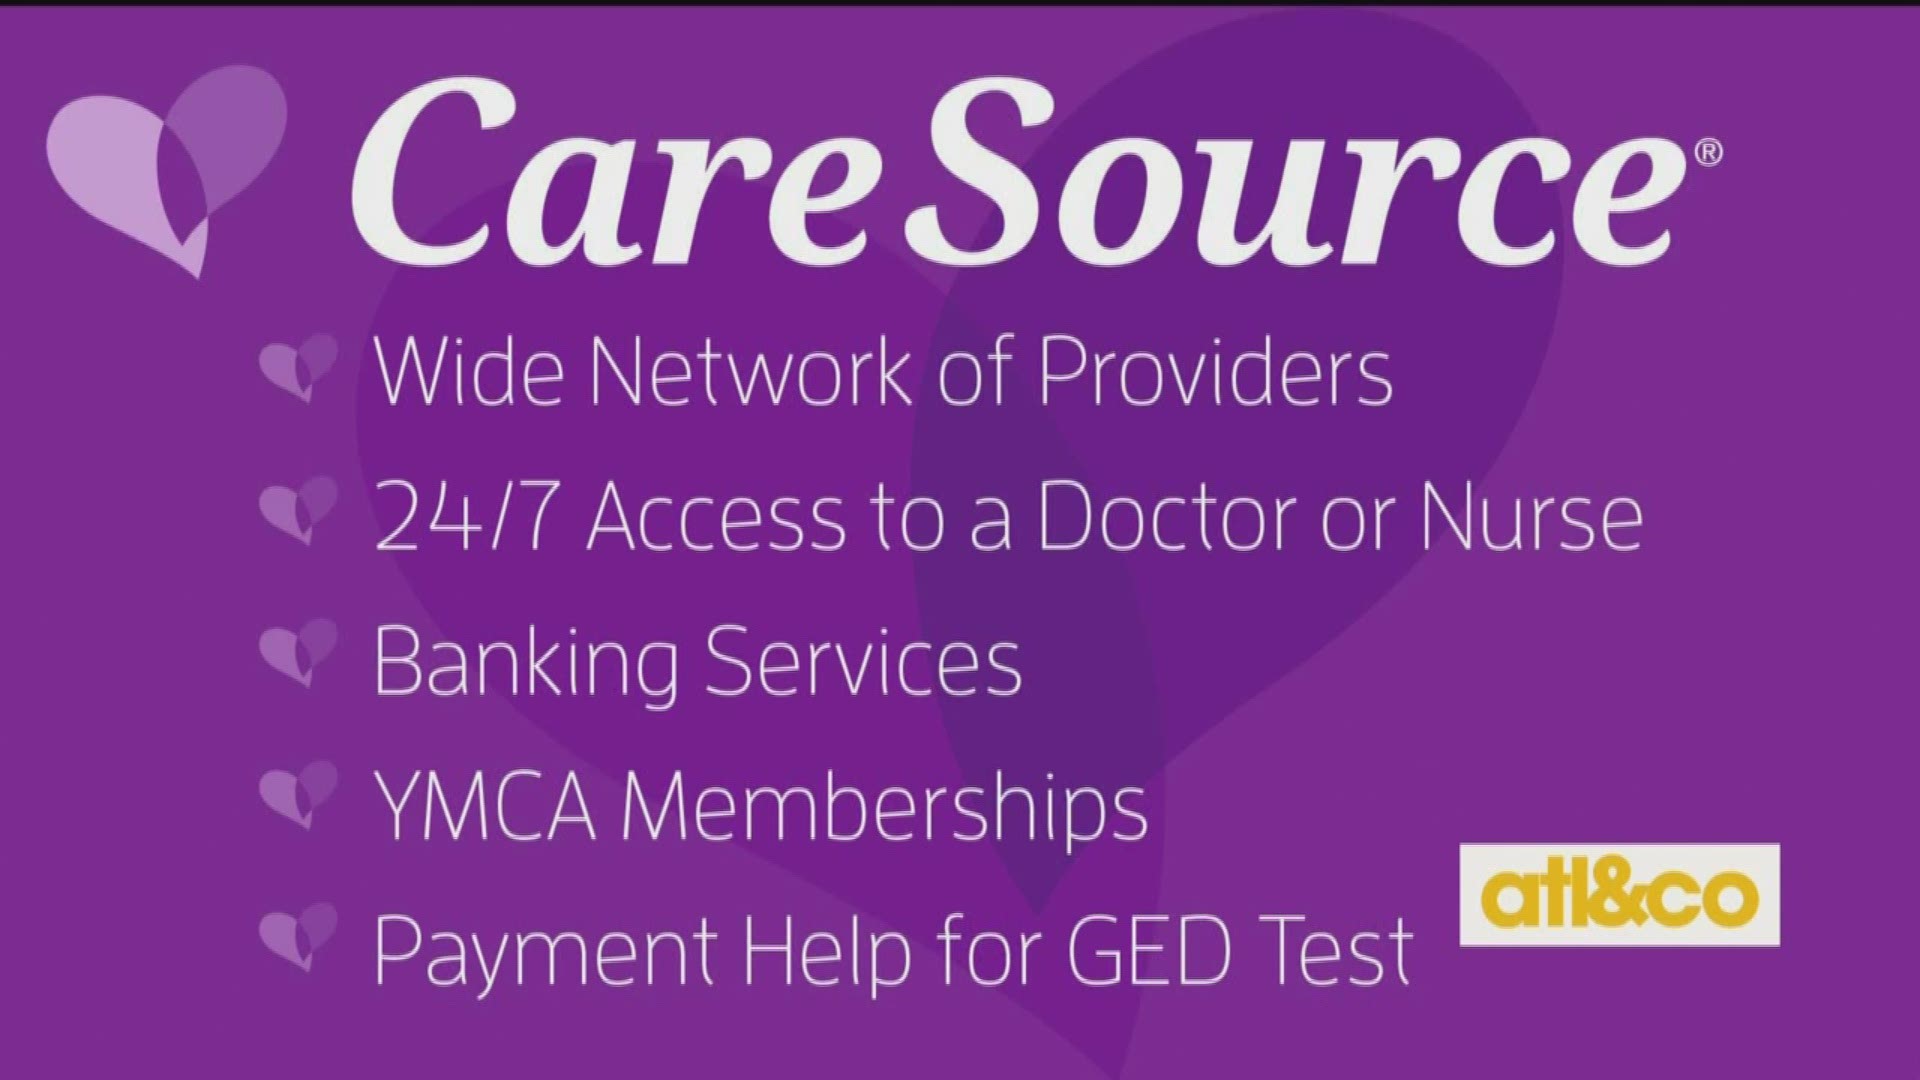 What type of medicaid is caresource amerigroup chips providers